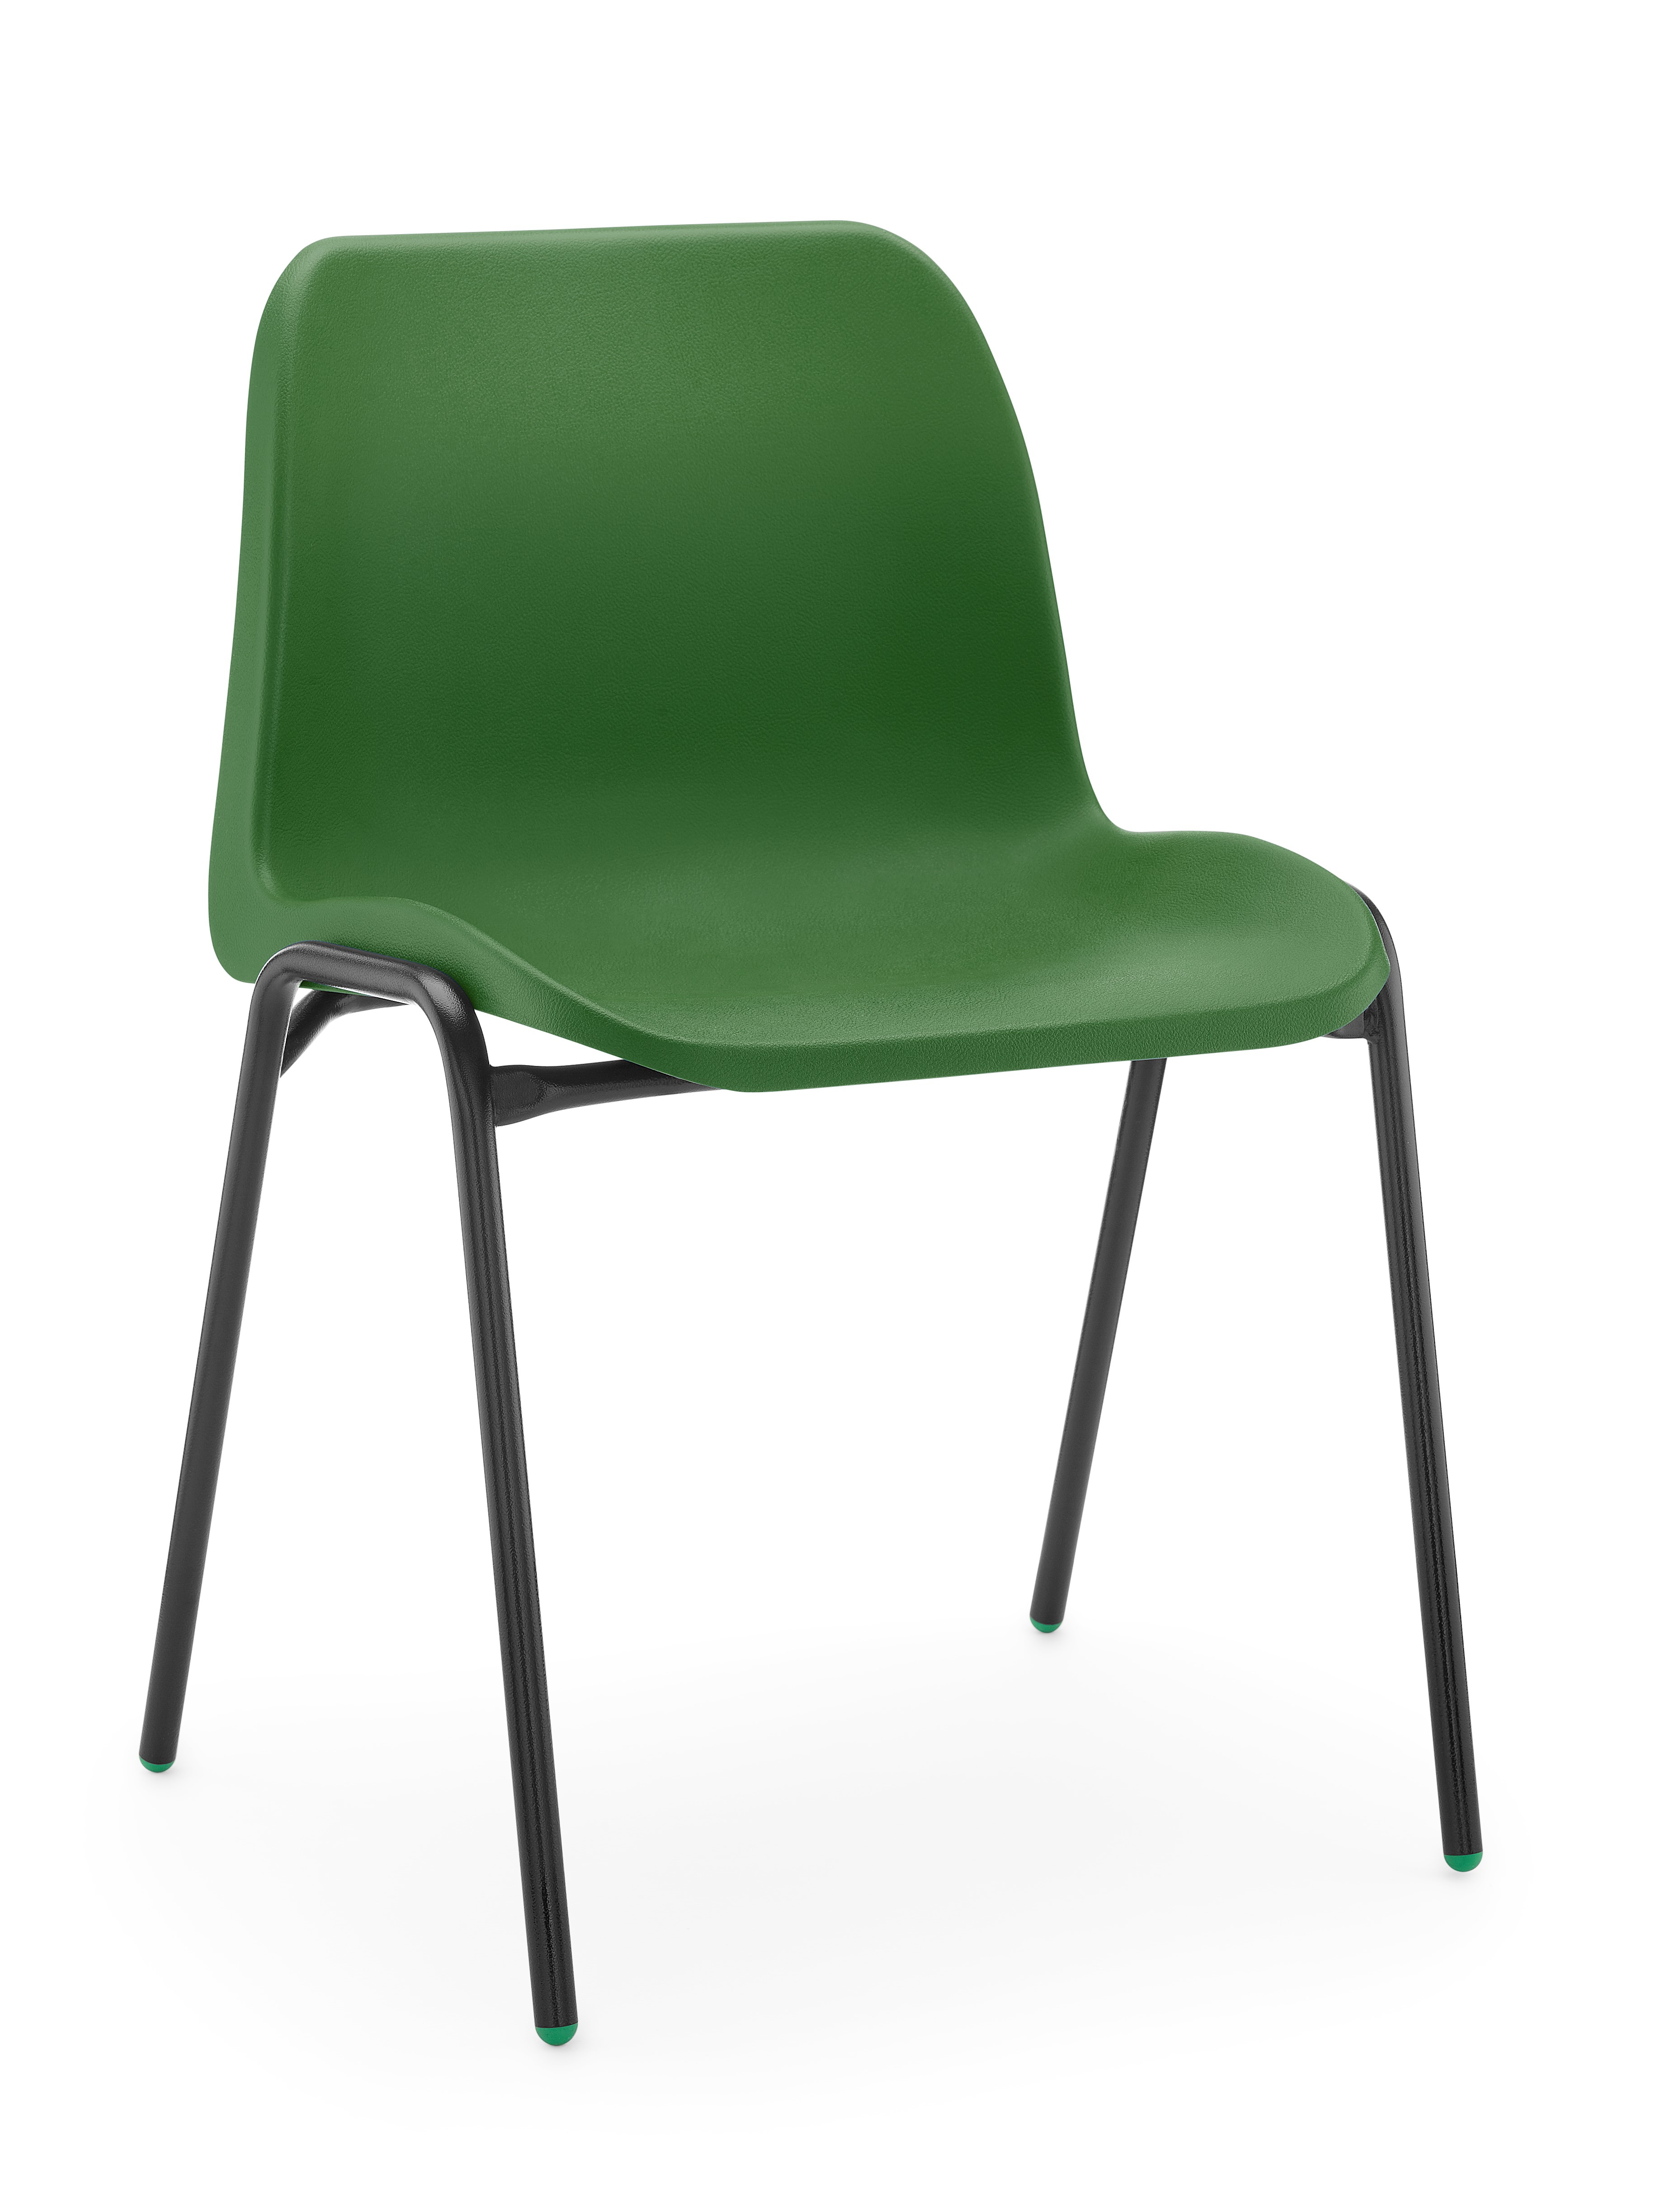 Classmates Chairs - Green - 6-8 years